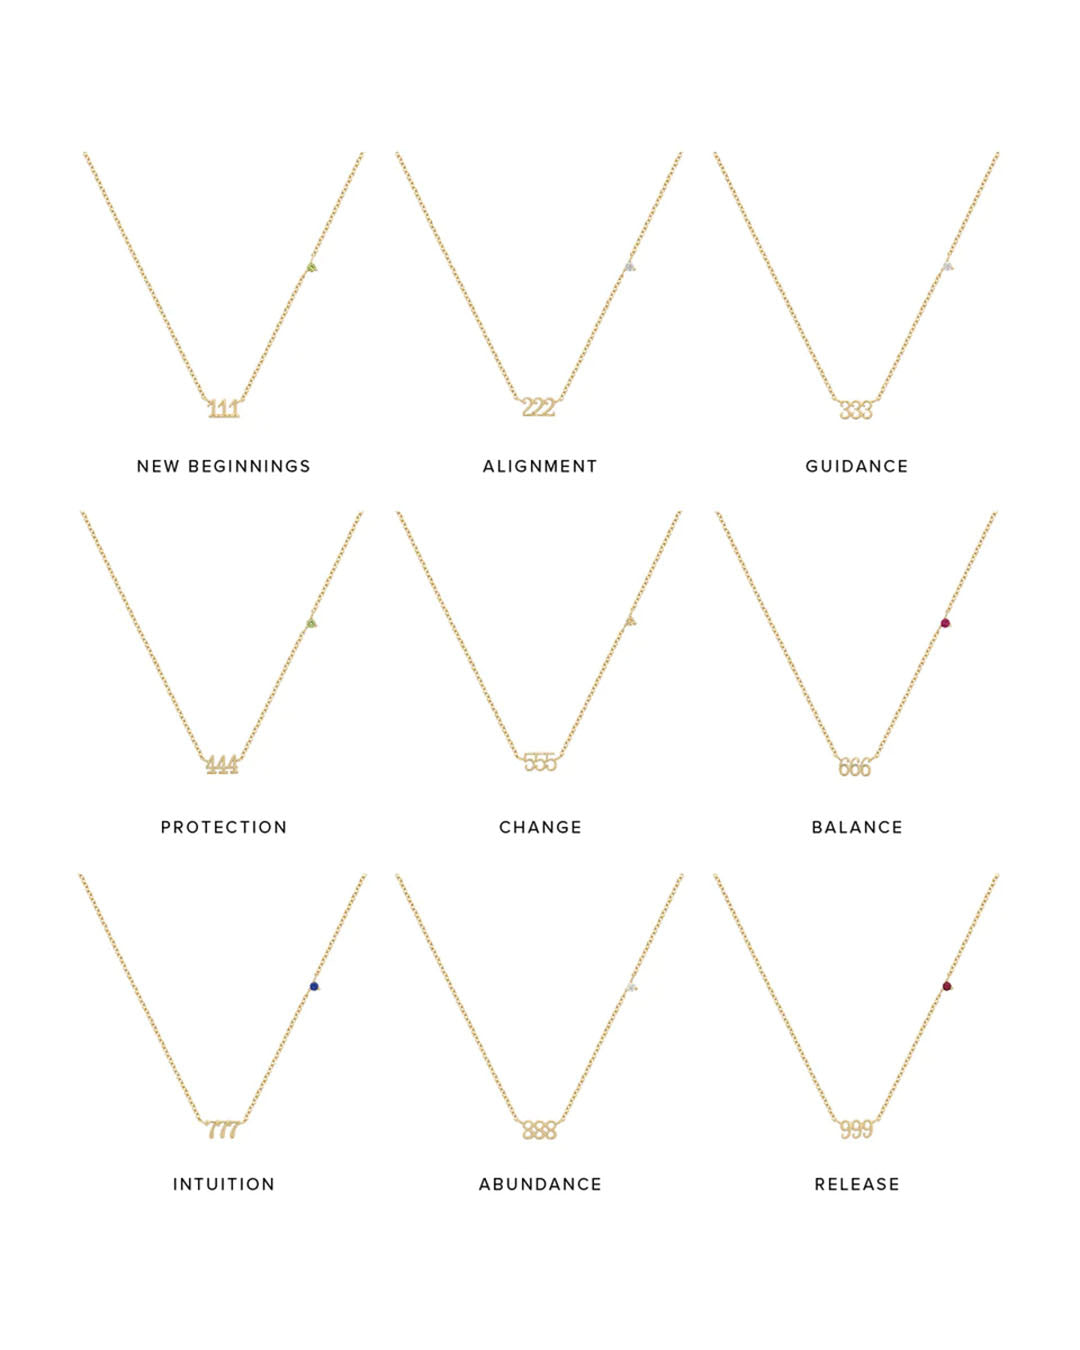 555 Angel Number Choker Necklaces by YCL Jewels - Prae Store